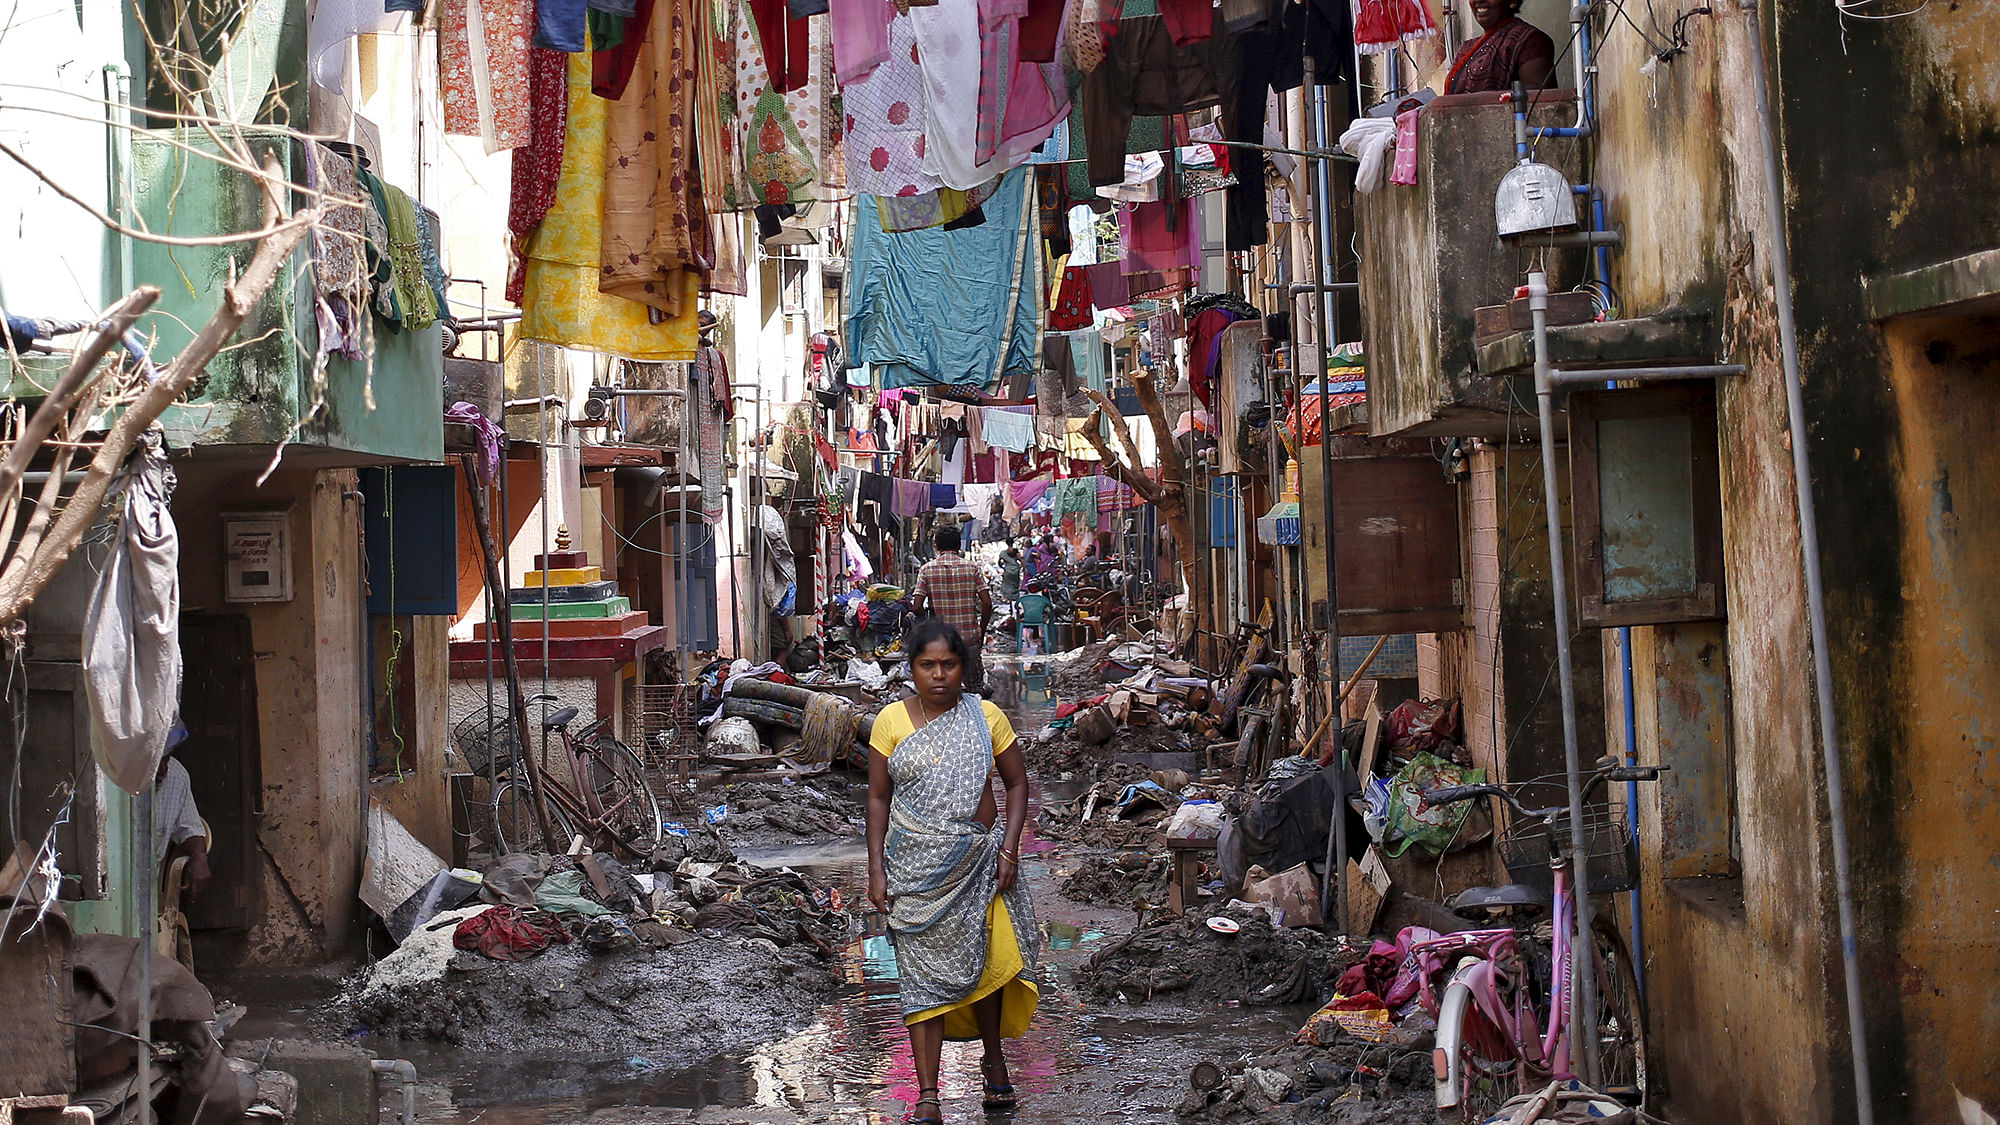 A woman walks in an alley filled with mud and debris in Chennai. (Photo: Reuters)